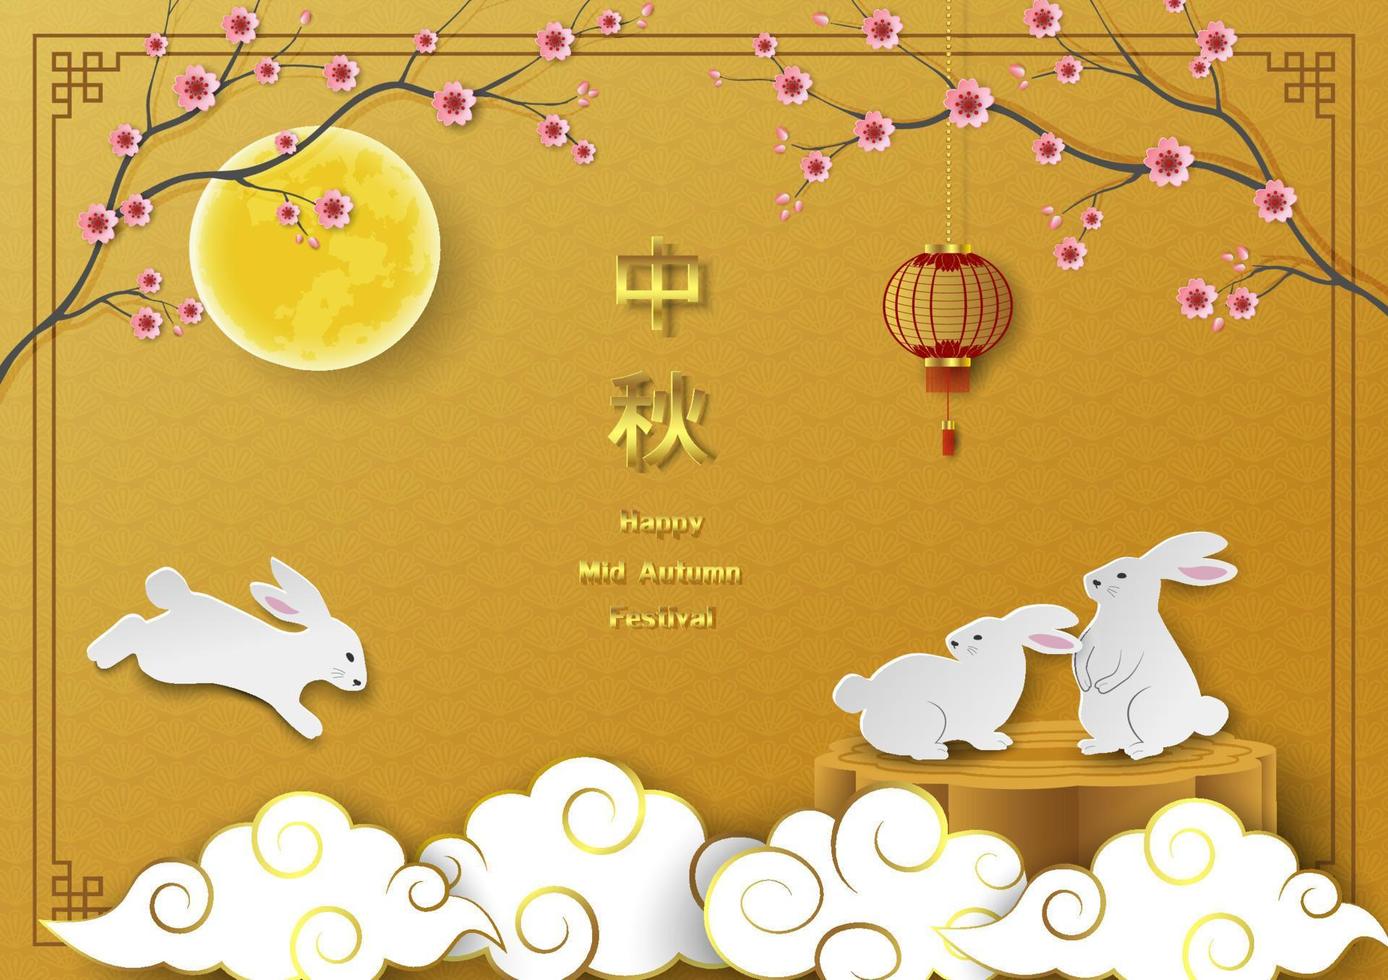 Mid Autumn Festival,celebration theme with cute rabbits,full moon,lantern,cherry blossom and moon cake on chinese background vector